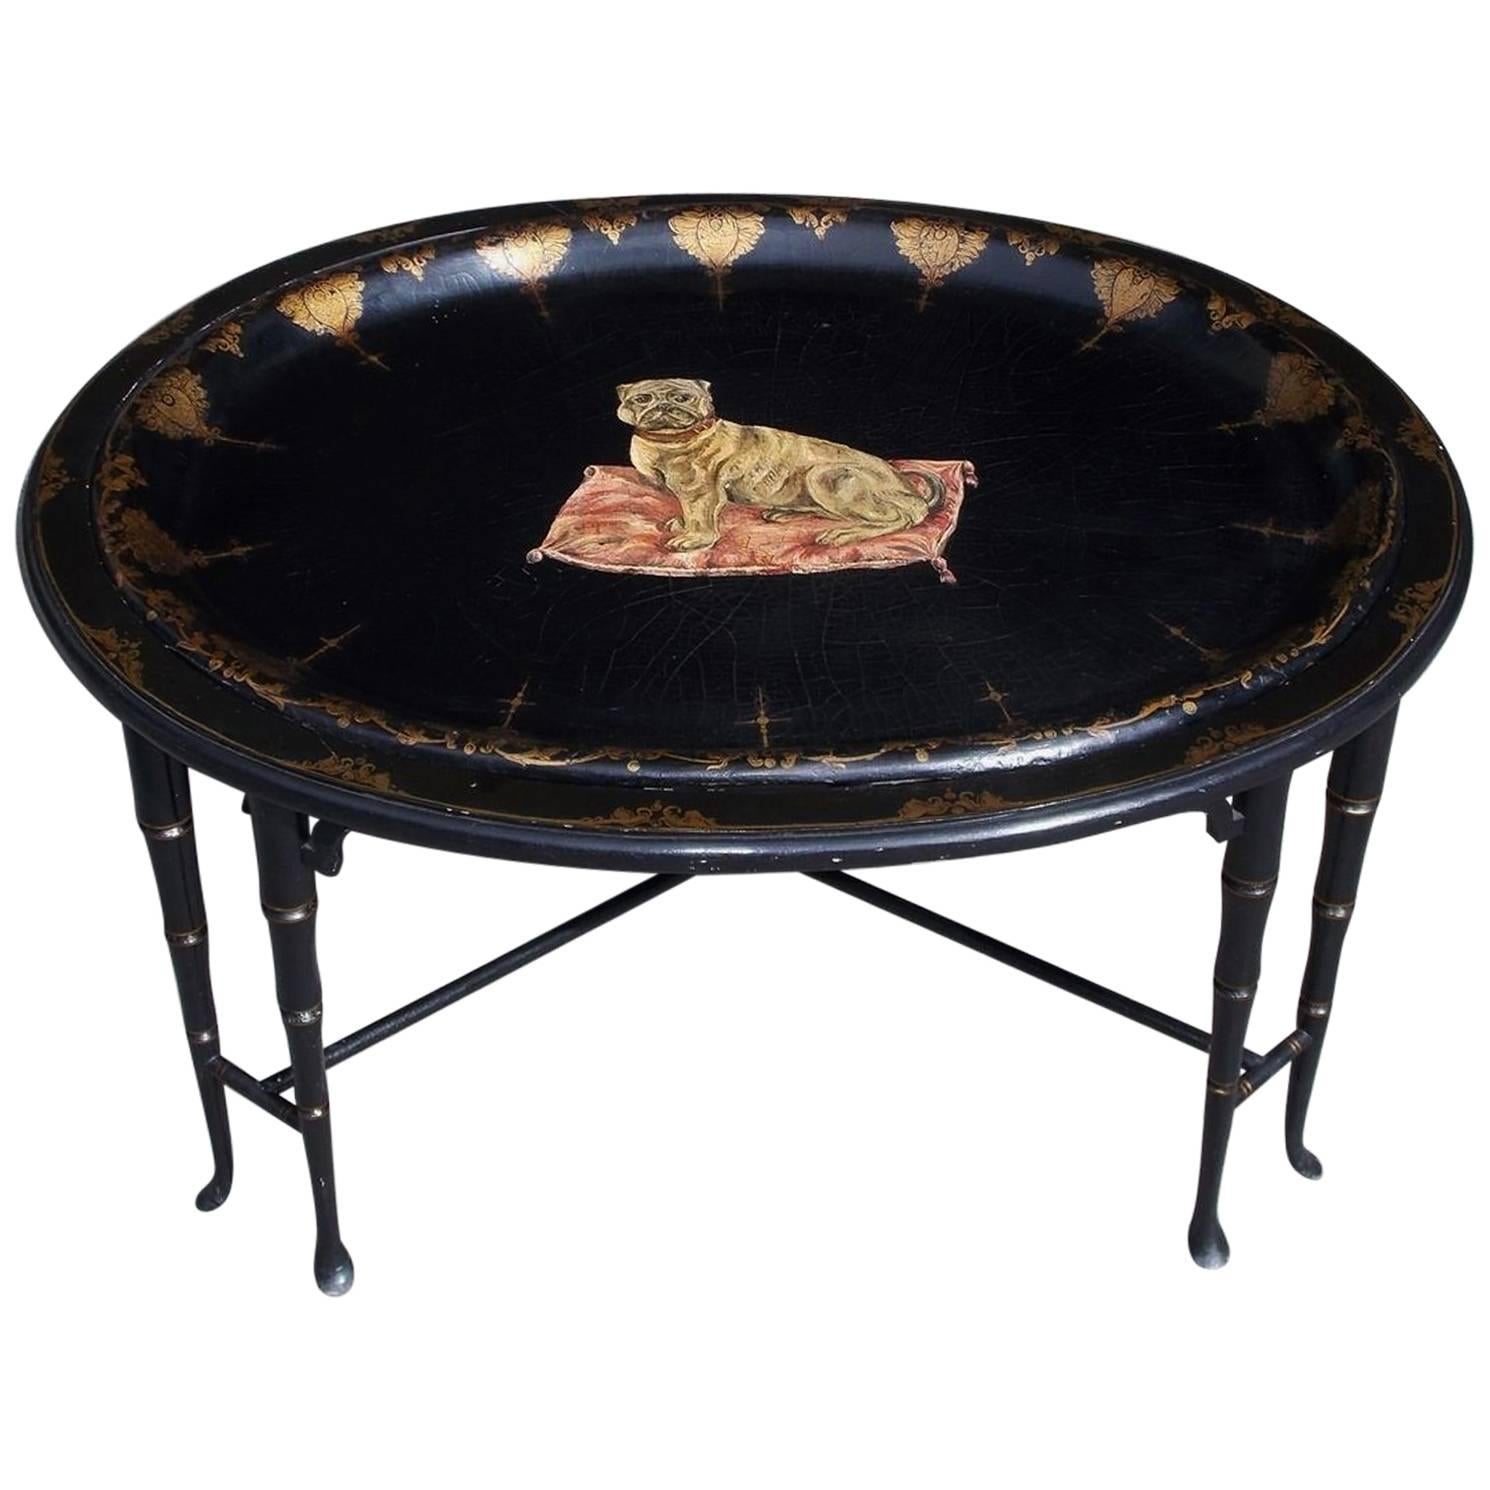 English Black Lacquer and Floral Gilt Oval Papier-Mache Tray on Stand, C. 1820